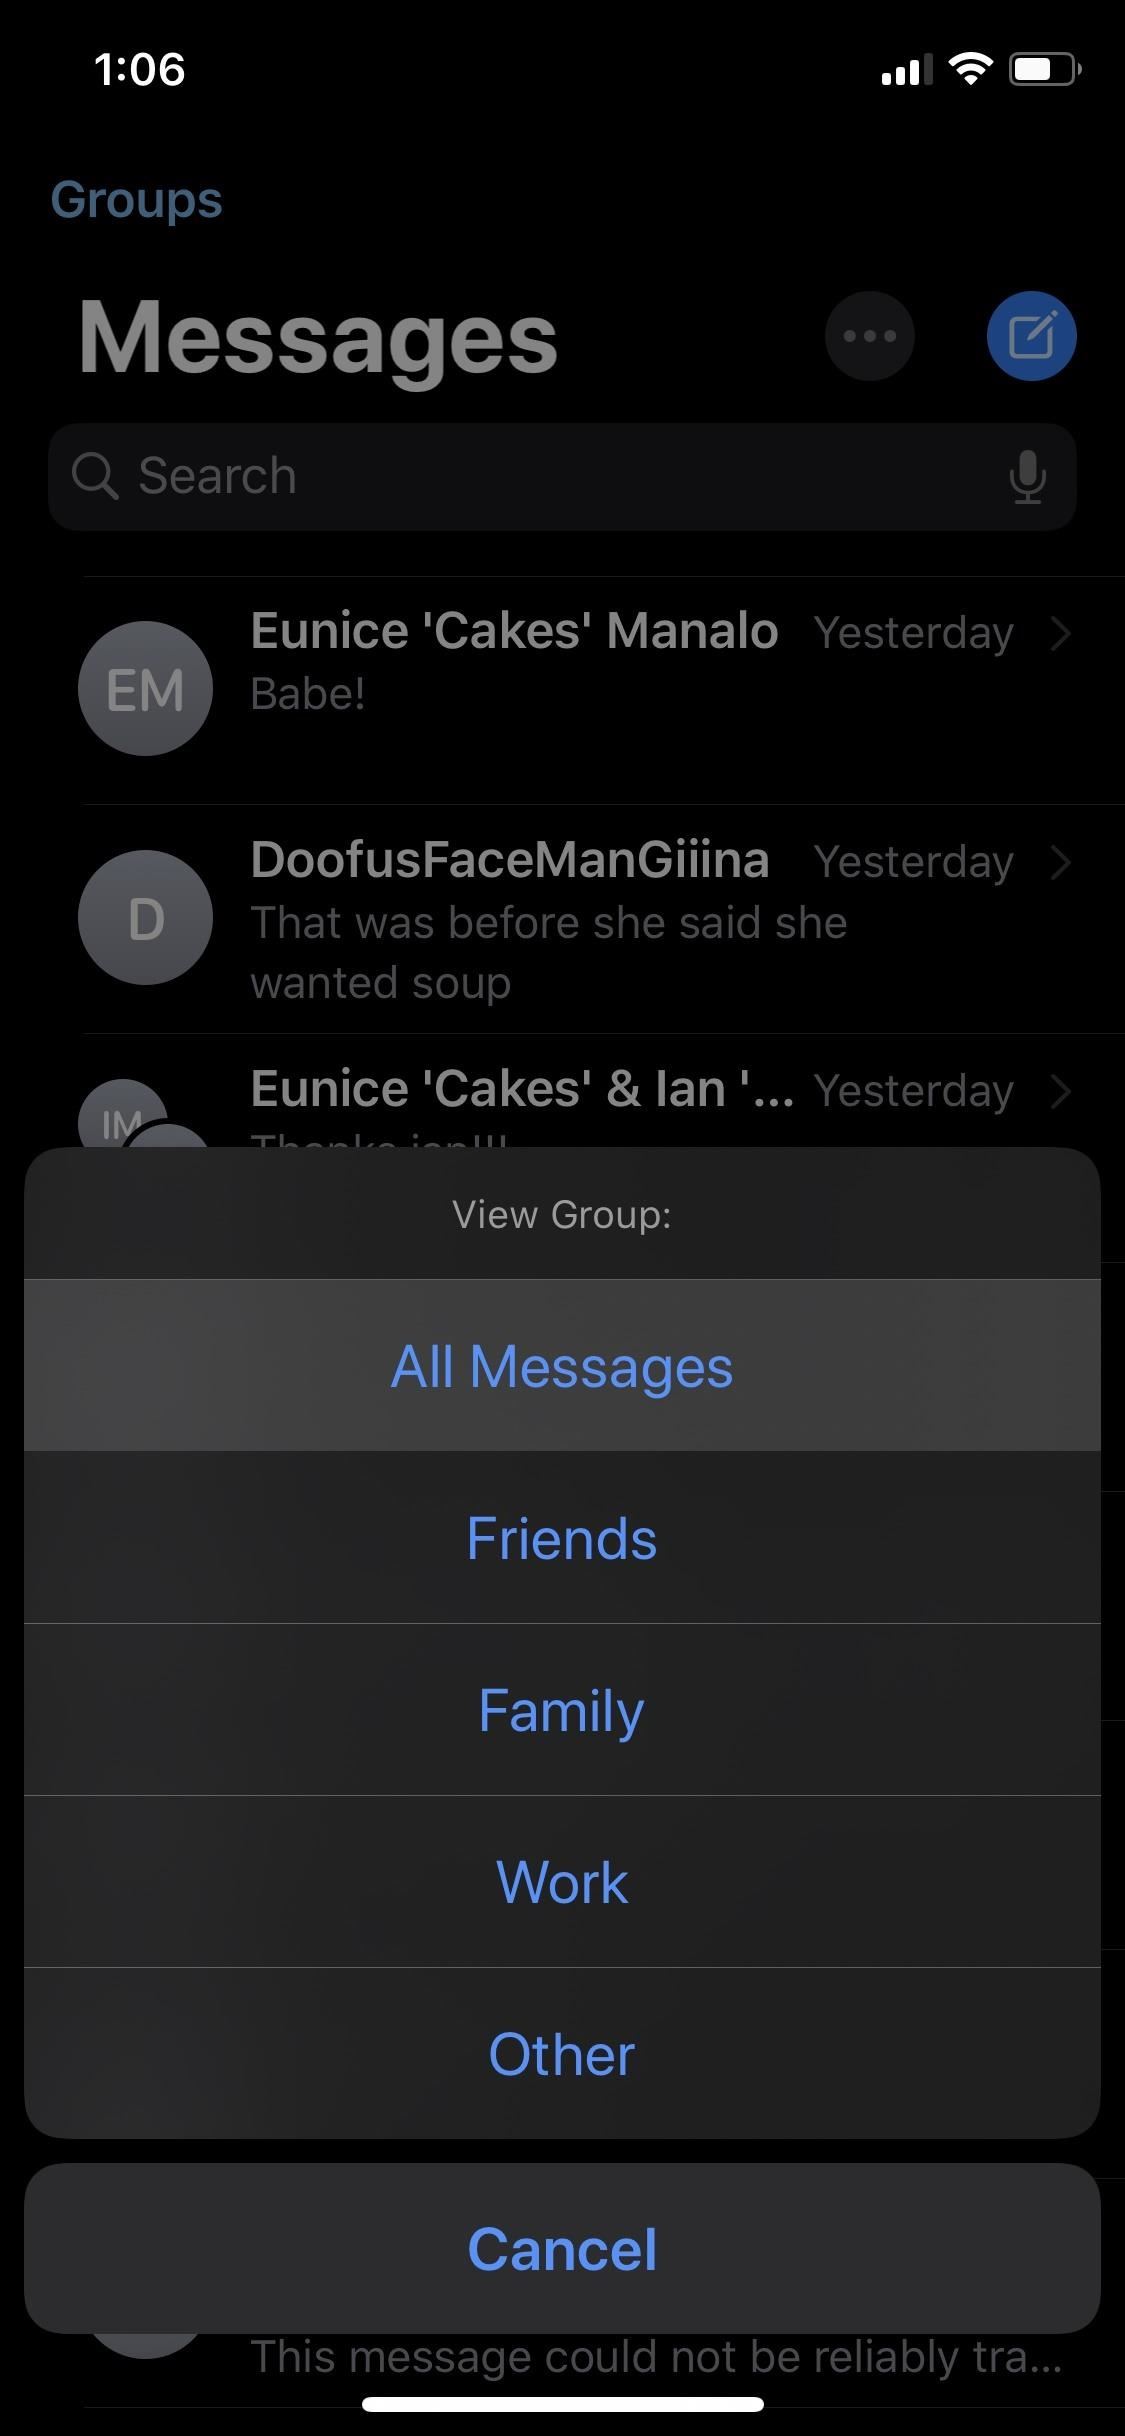 Organize Messages on Your iPhone by Grouping Threads Together into Specific Categories Like Family & Work